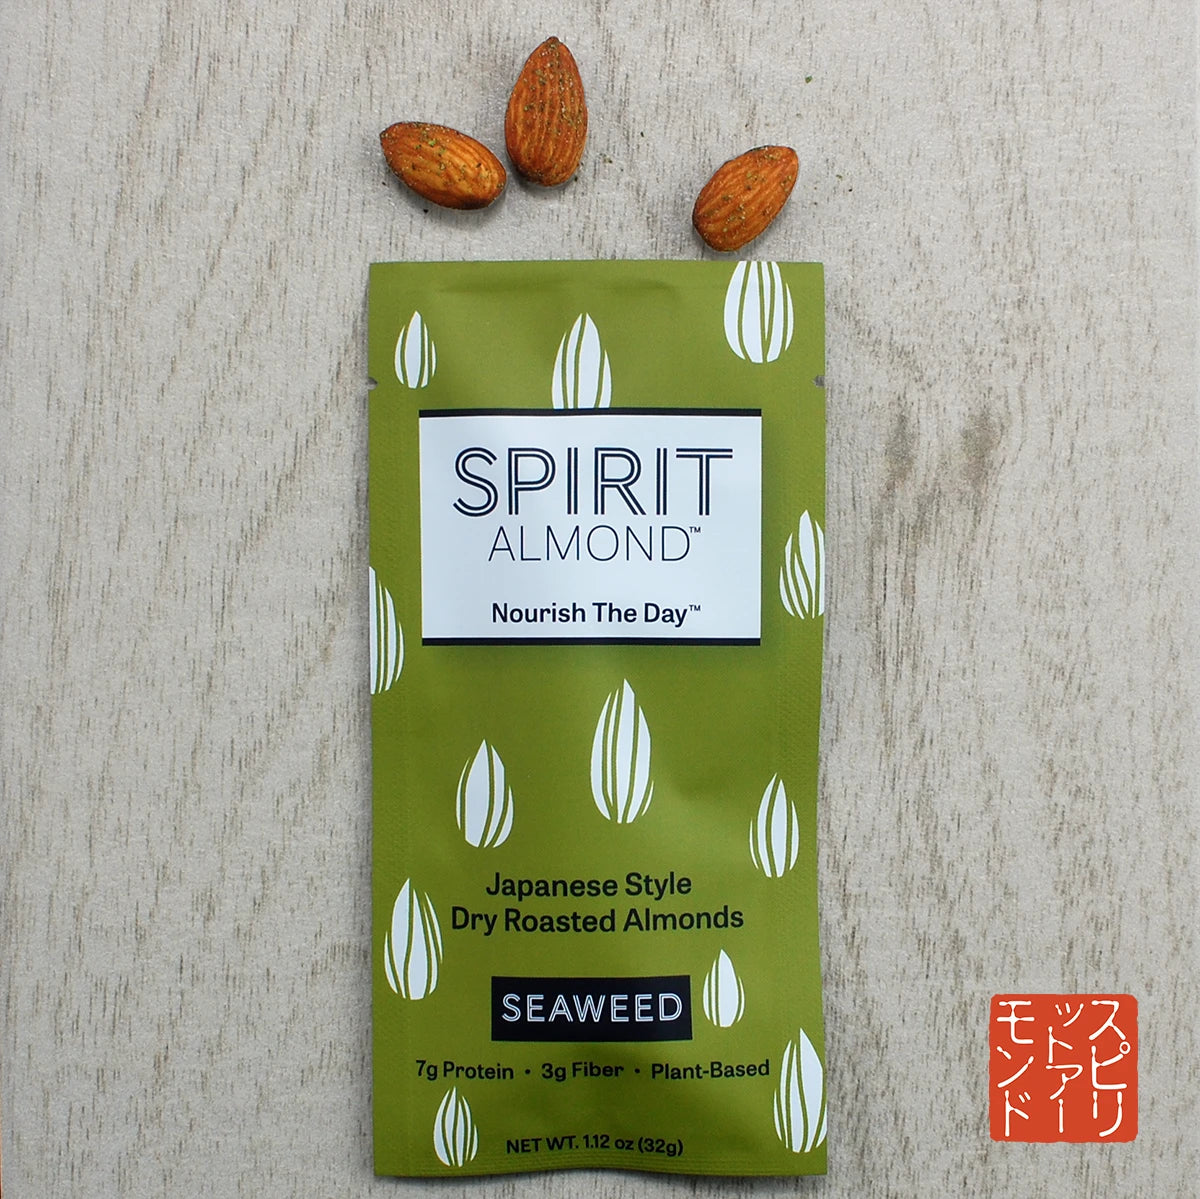 Package of SPIRIT Almond Seaweed flavor, with a few almonds displayed